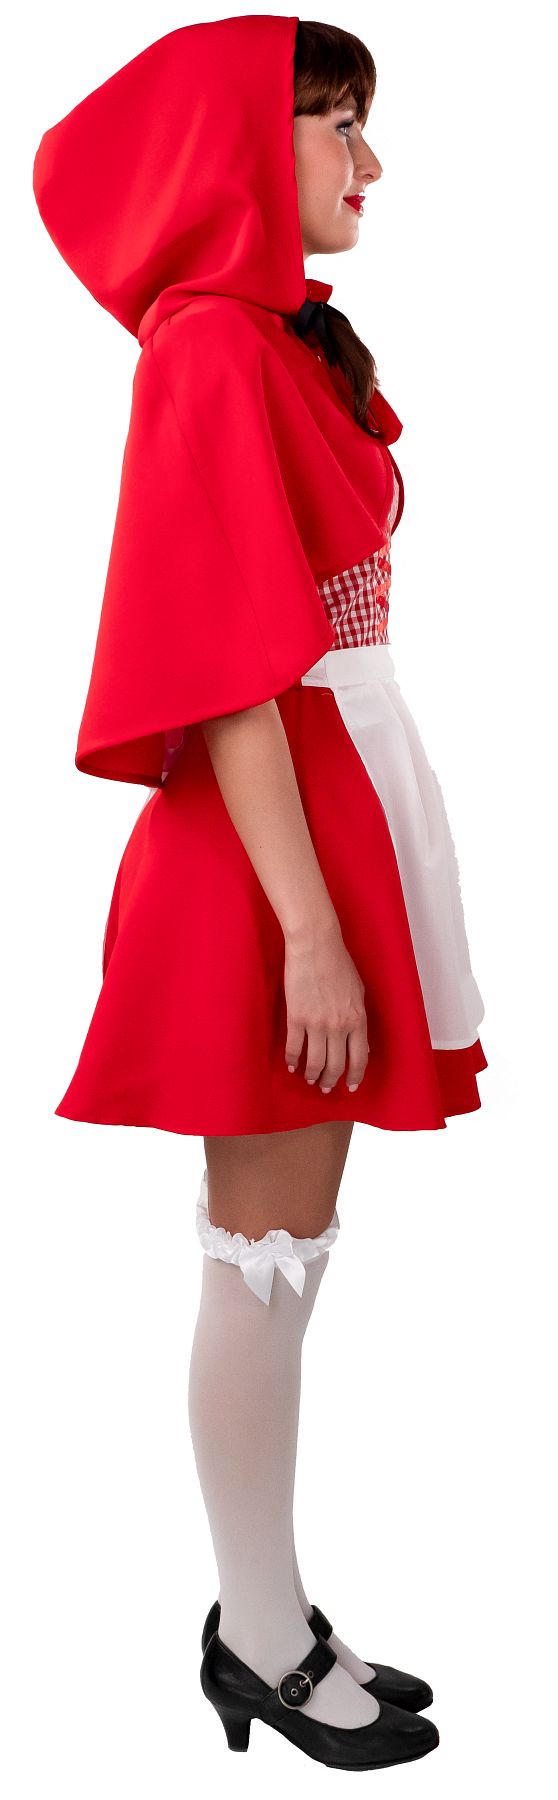 Red dress with cape